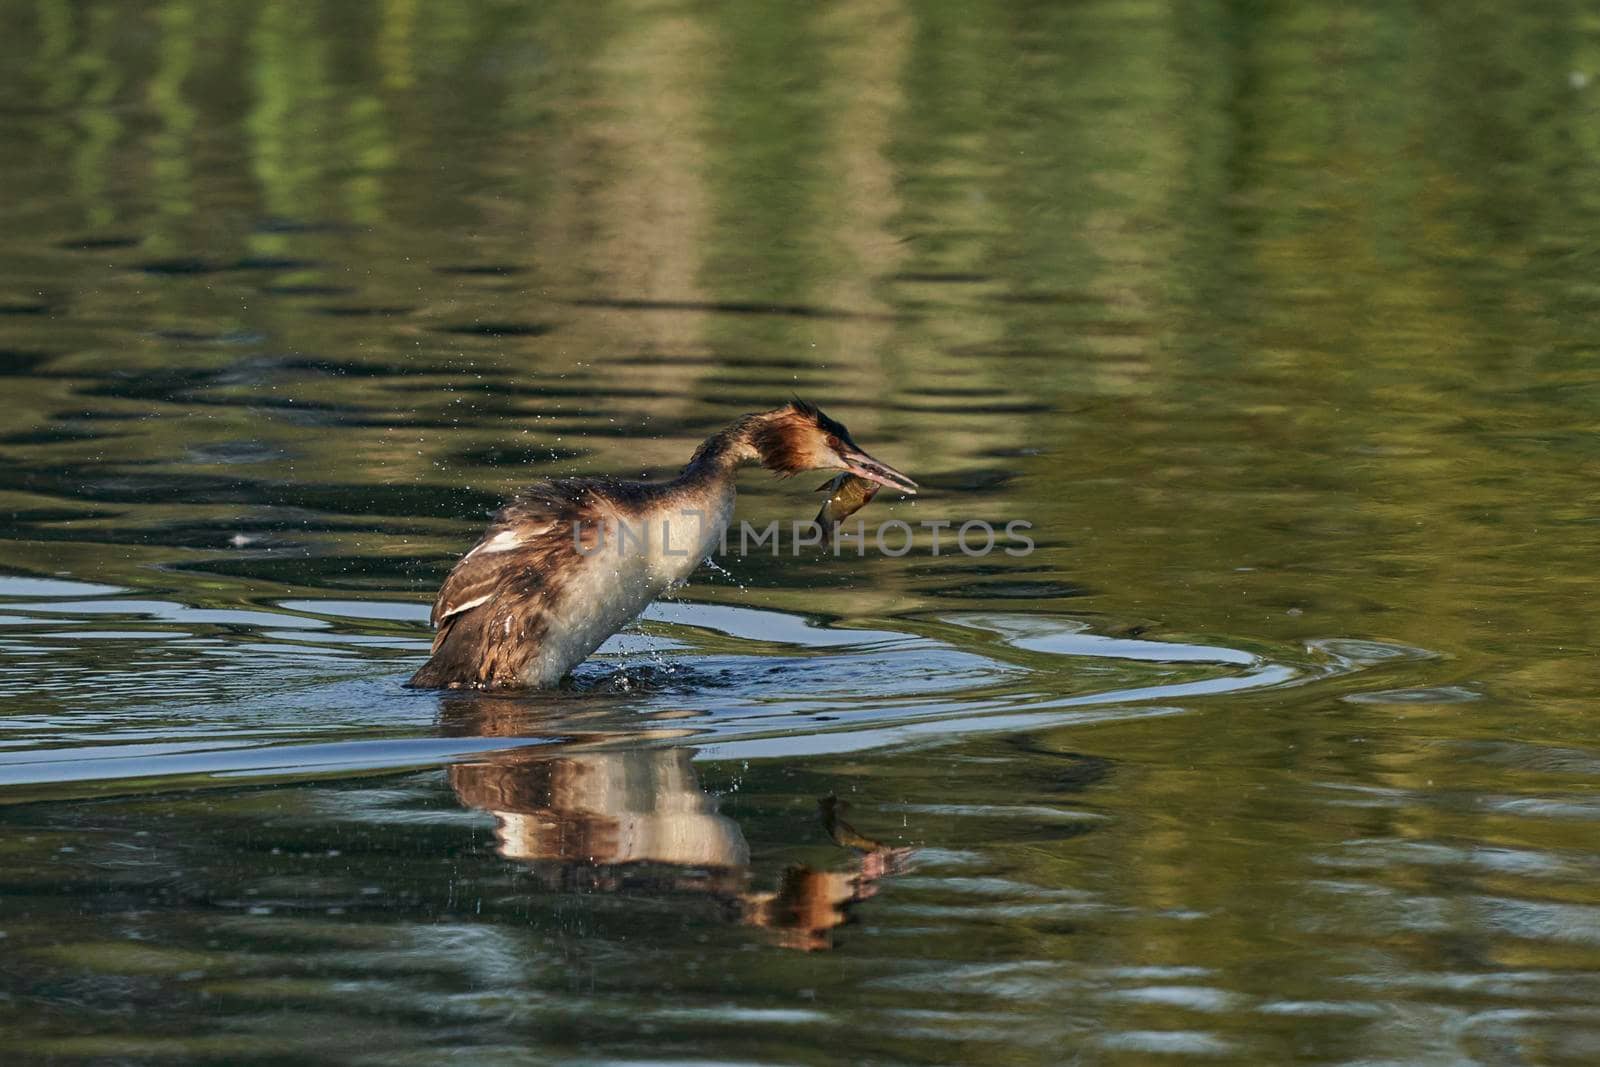 Great Crested Grebe (Podiceps cristatus) grappling with a recently caught fish on a lake at Ham Wall in Somerset, United Kingdom.